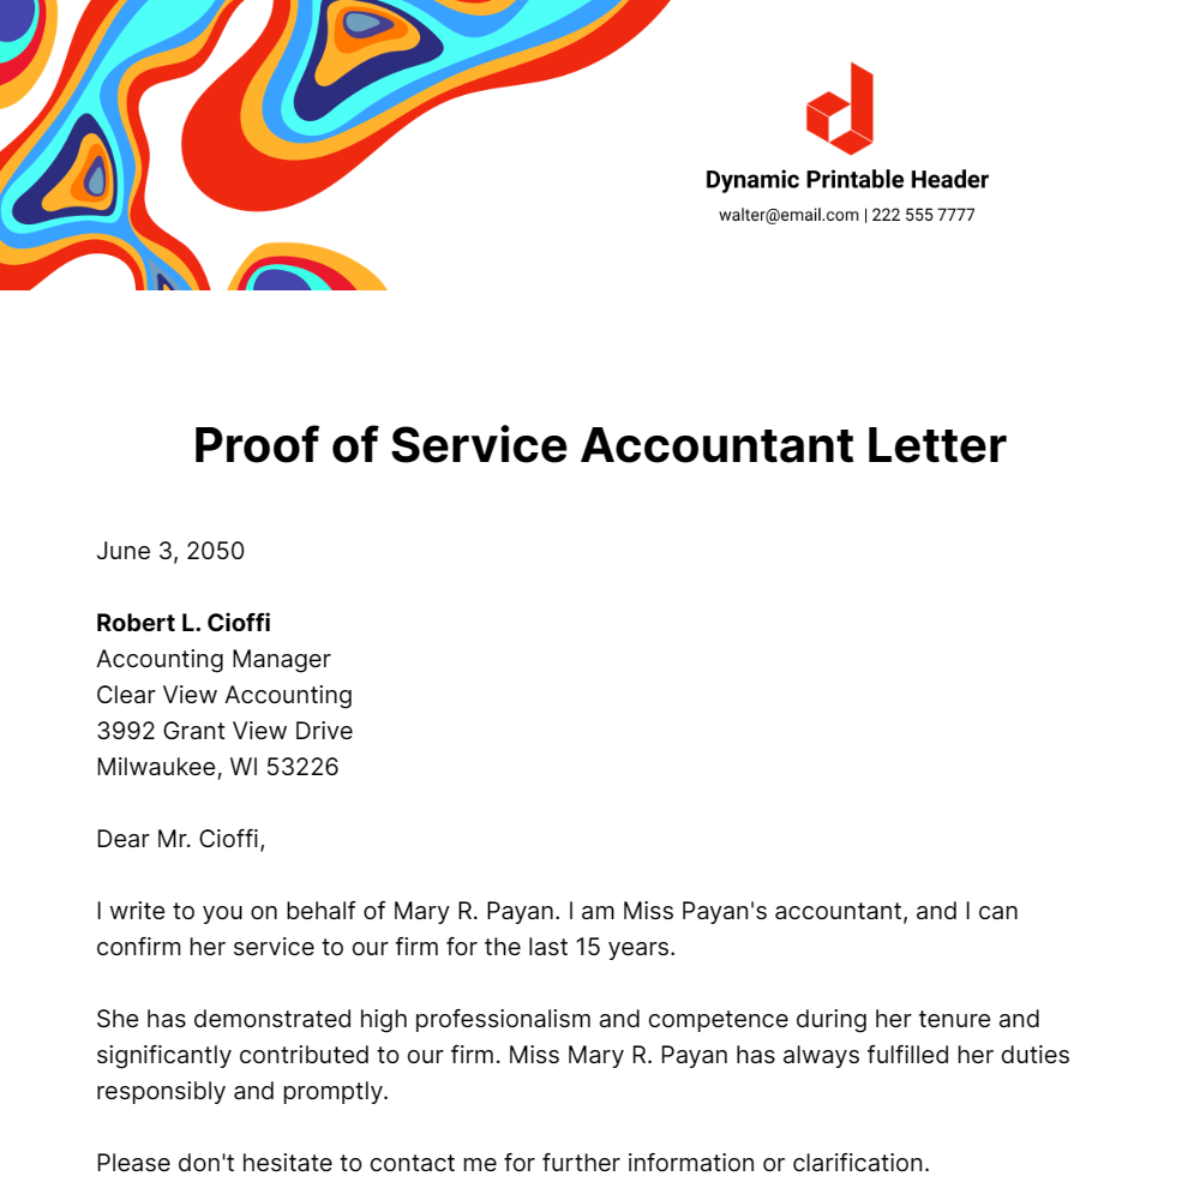 Free Proof of Service Accountant Letter Template